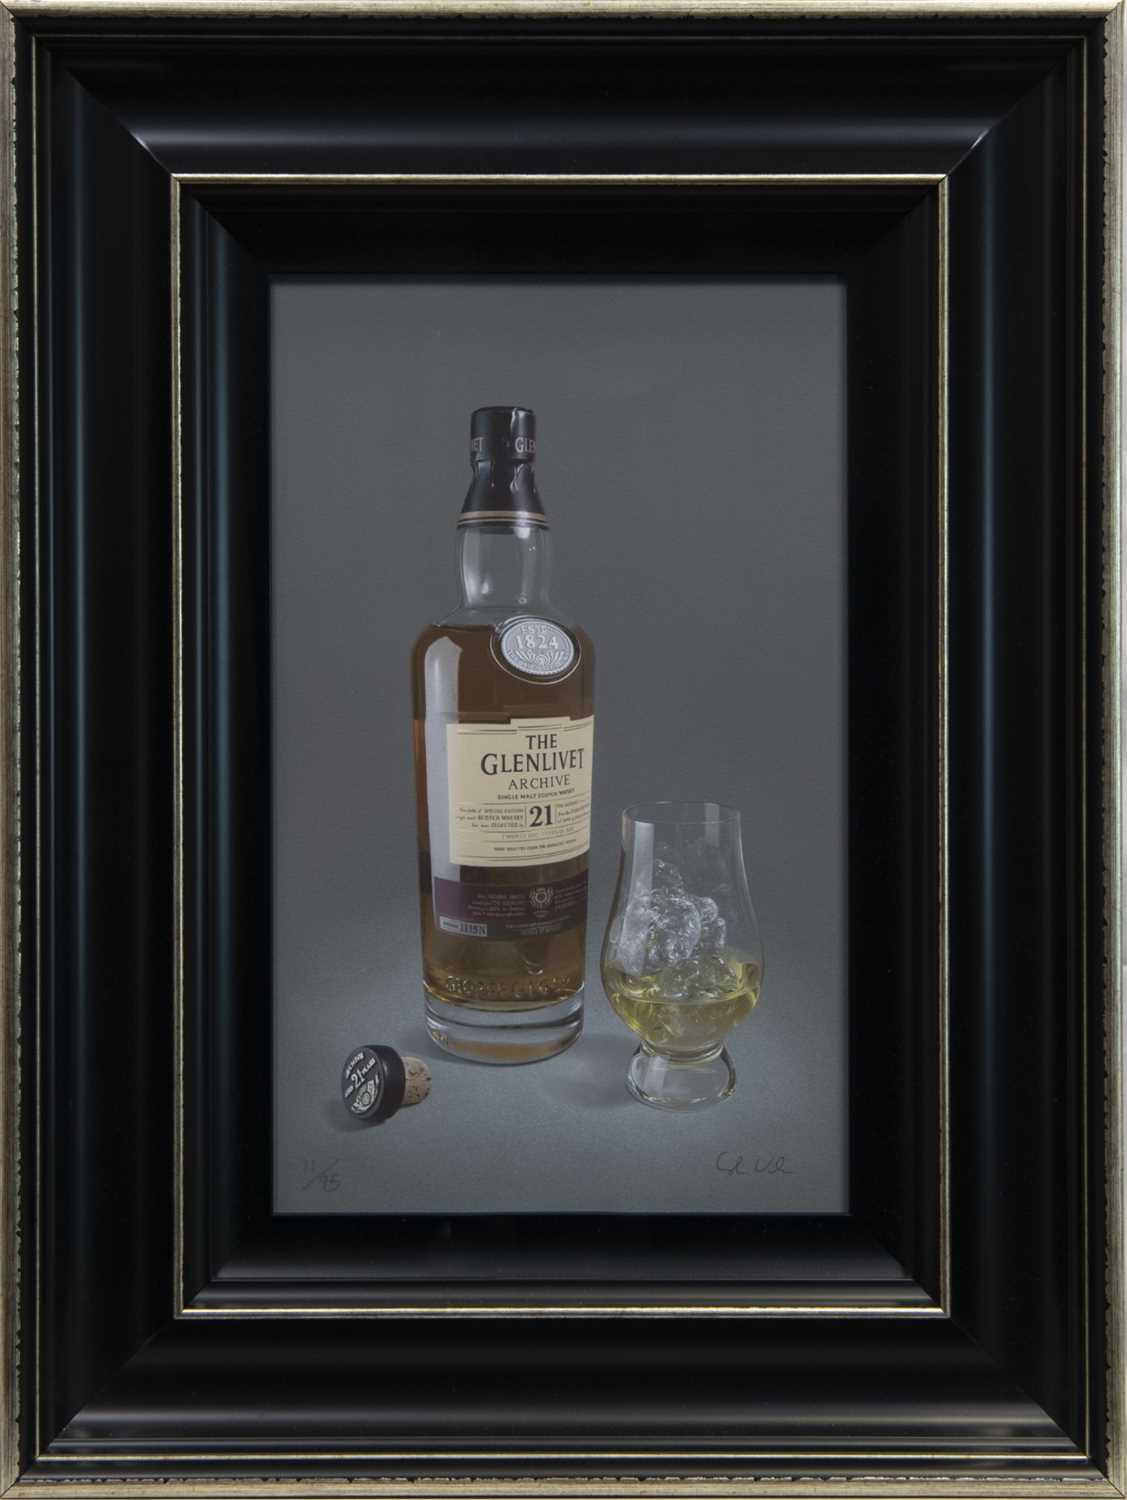 Lot 98 - 21 YEAR GLENLIVET, A GICLEE PRINT BY COLIN WILSON